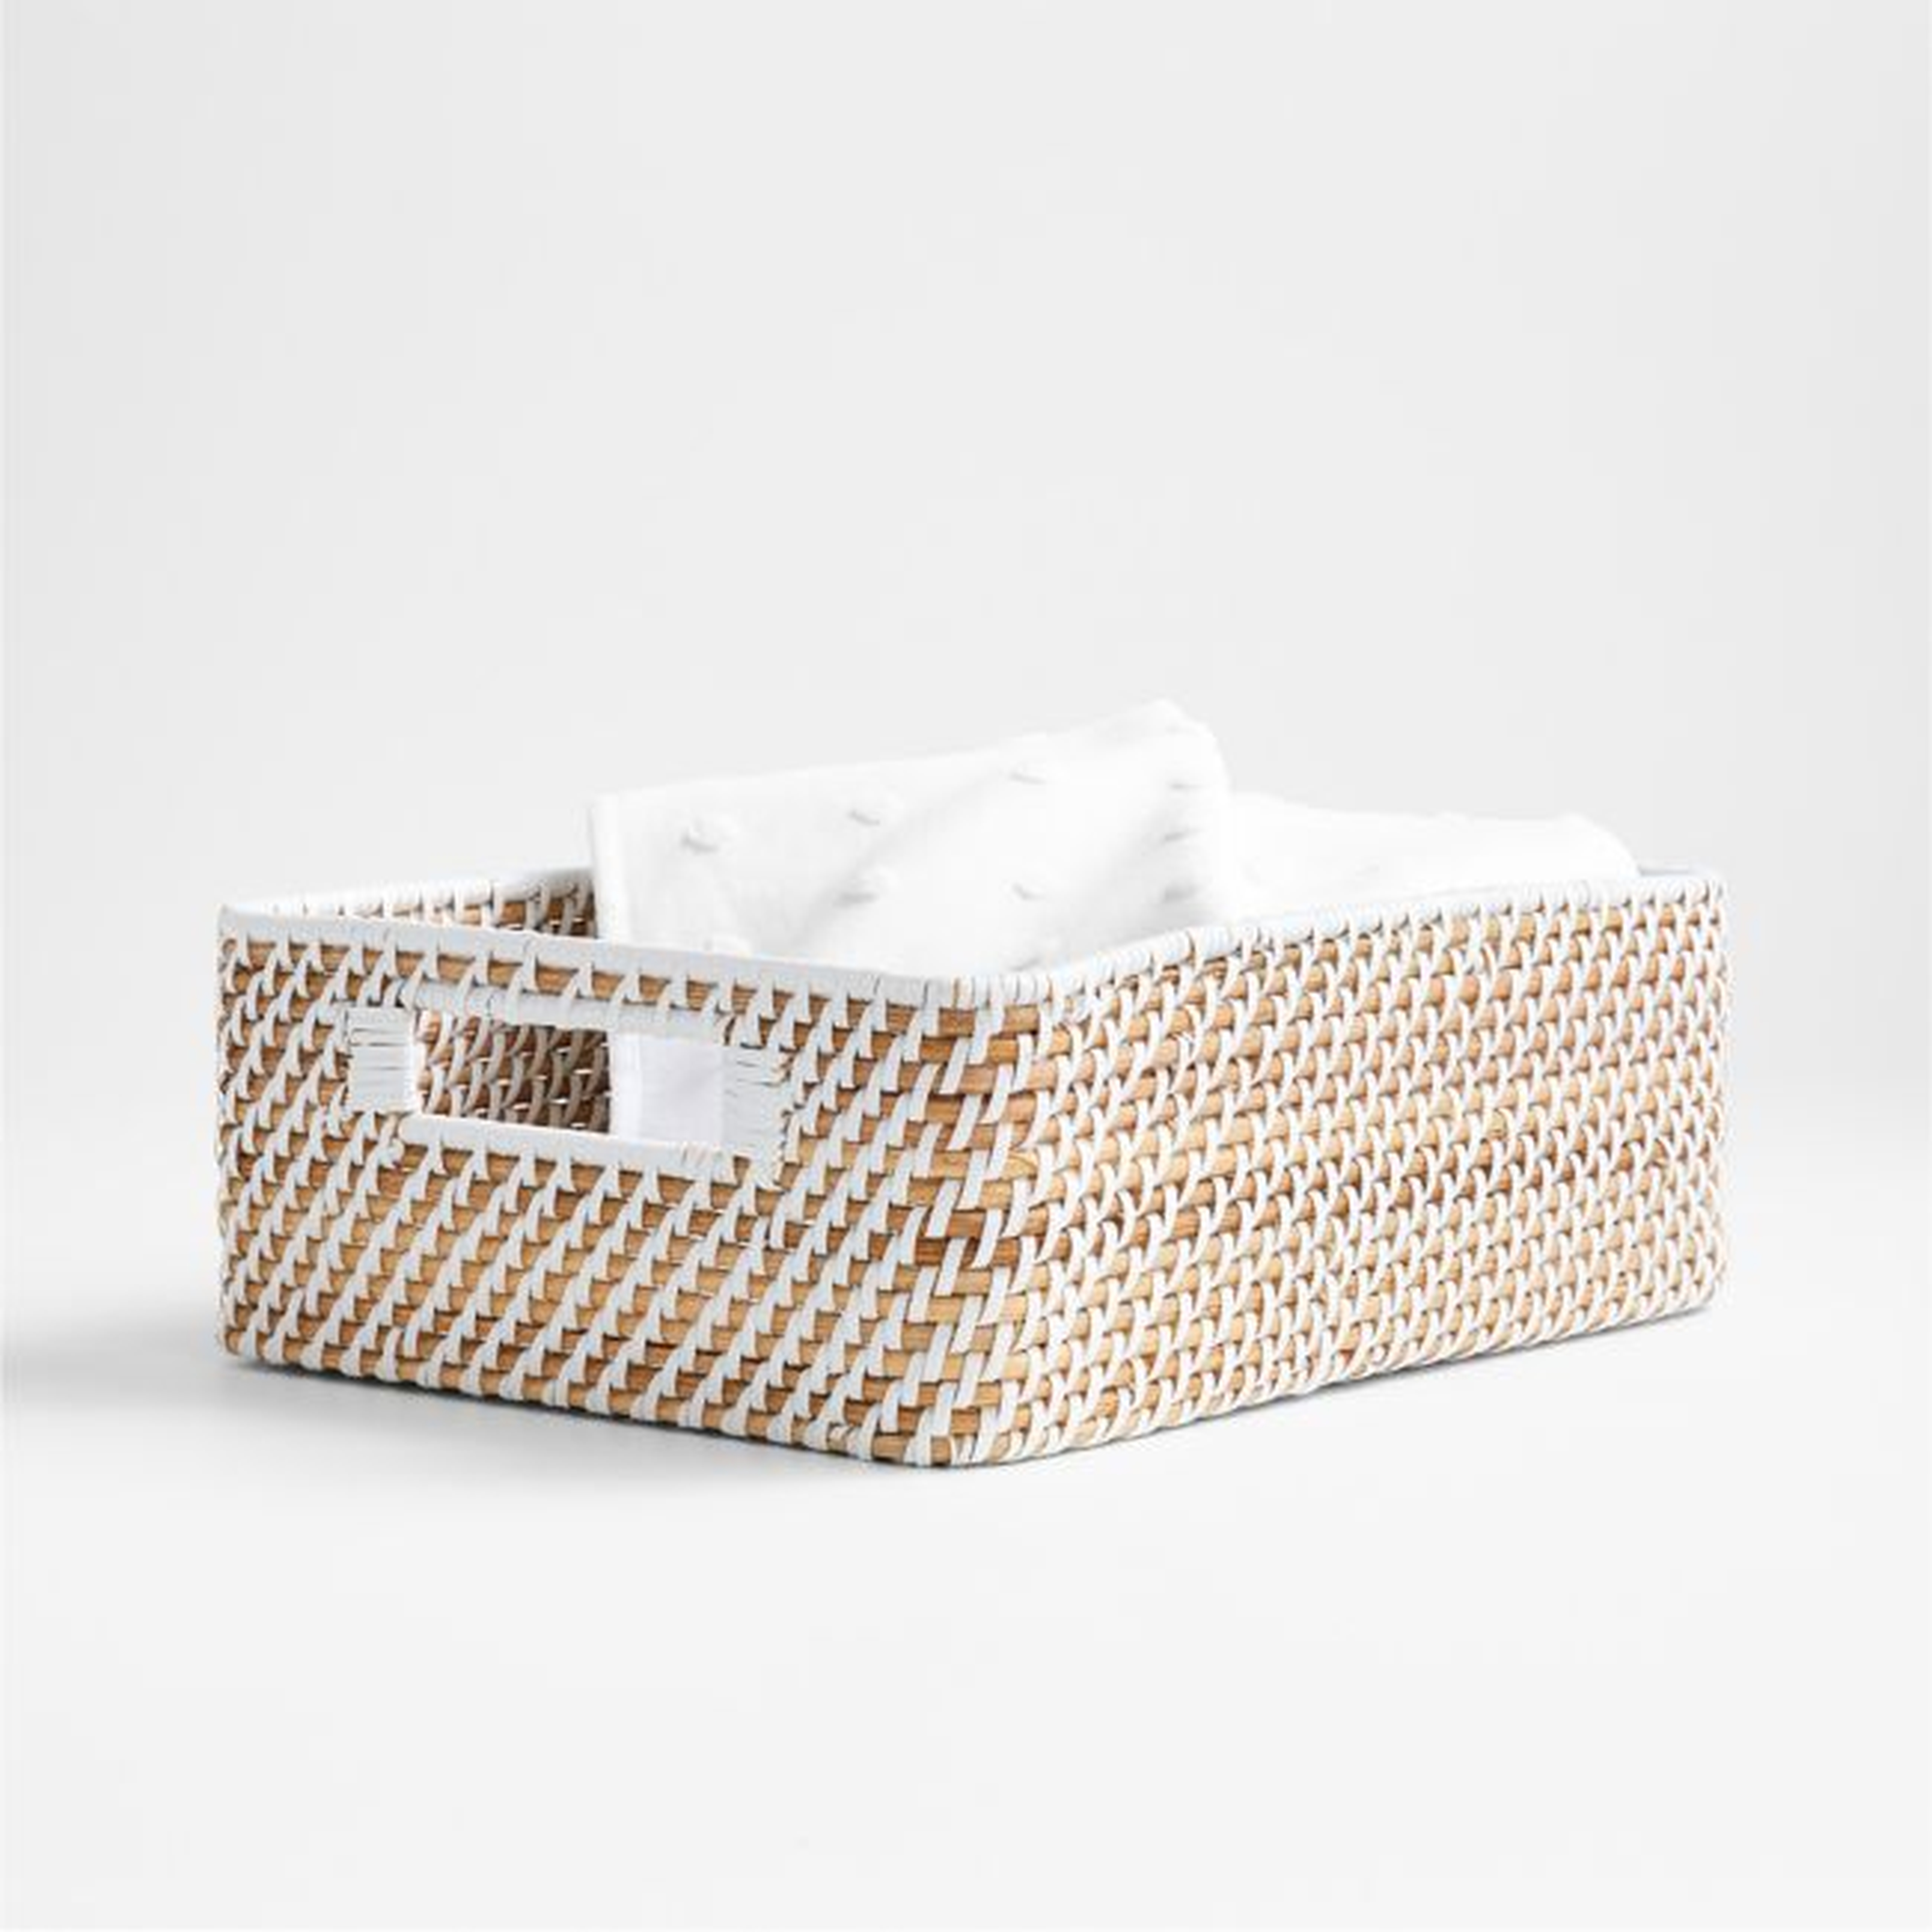 Sedona White Low Open Tote - Crate and Barrel